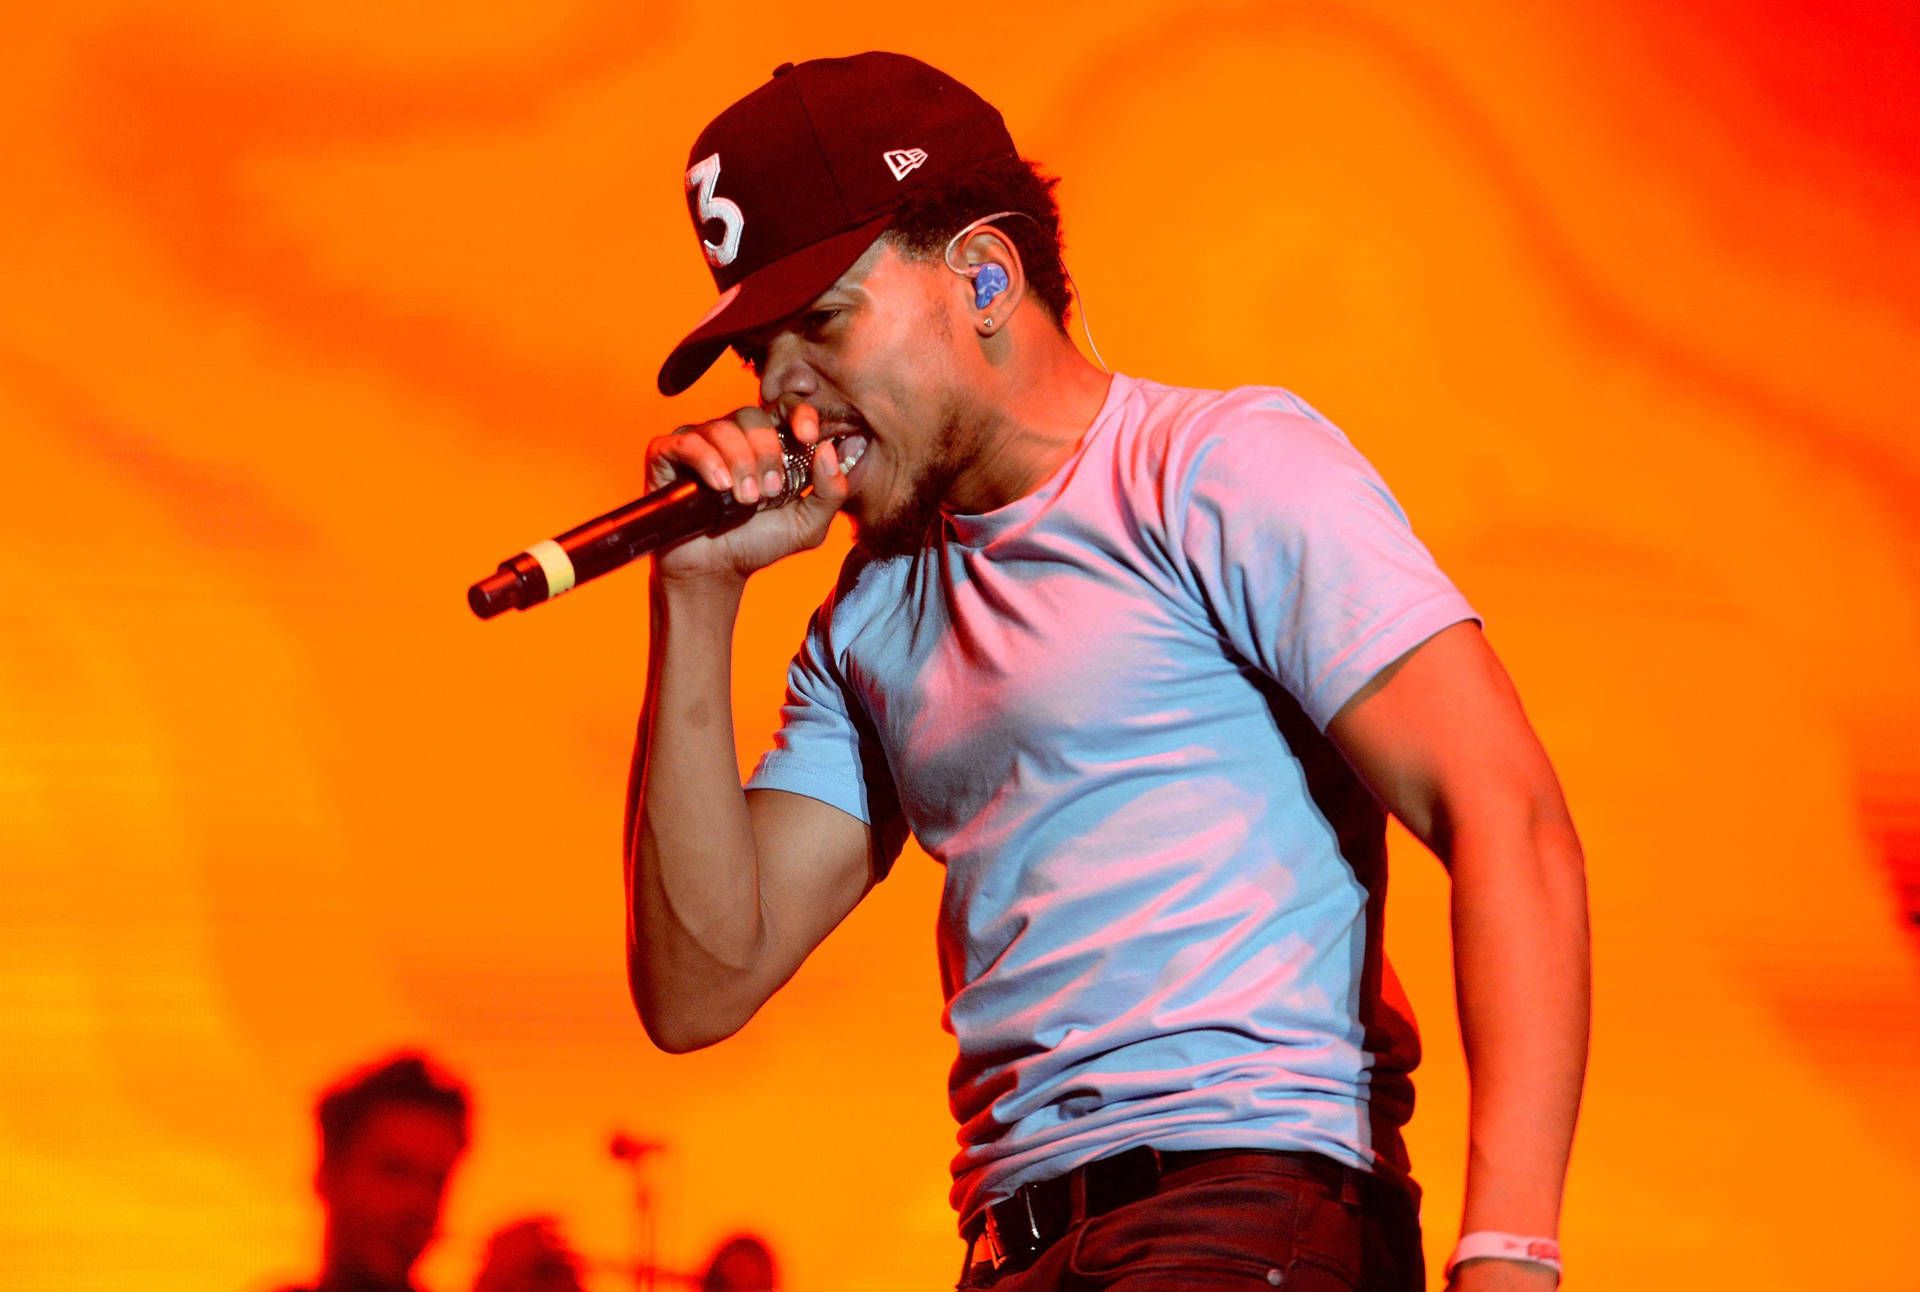 Download Flaming Chance The Rapper Wallpaper